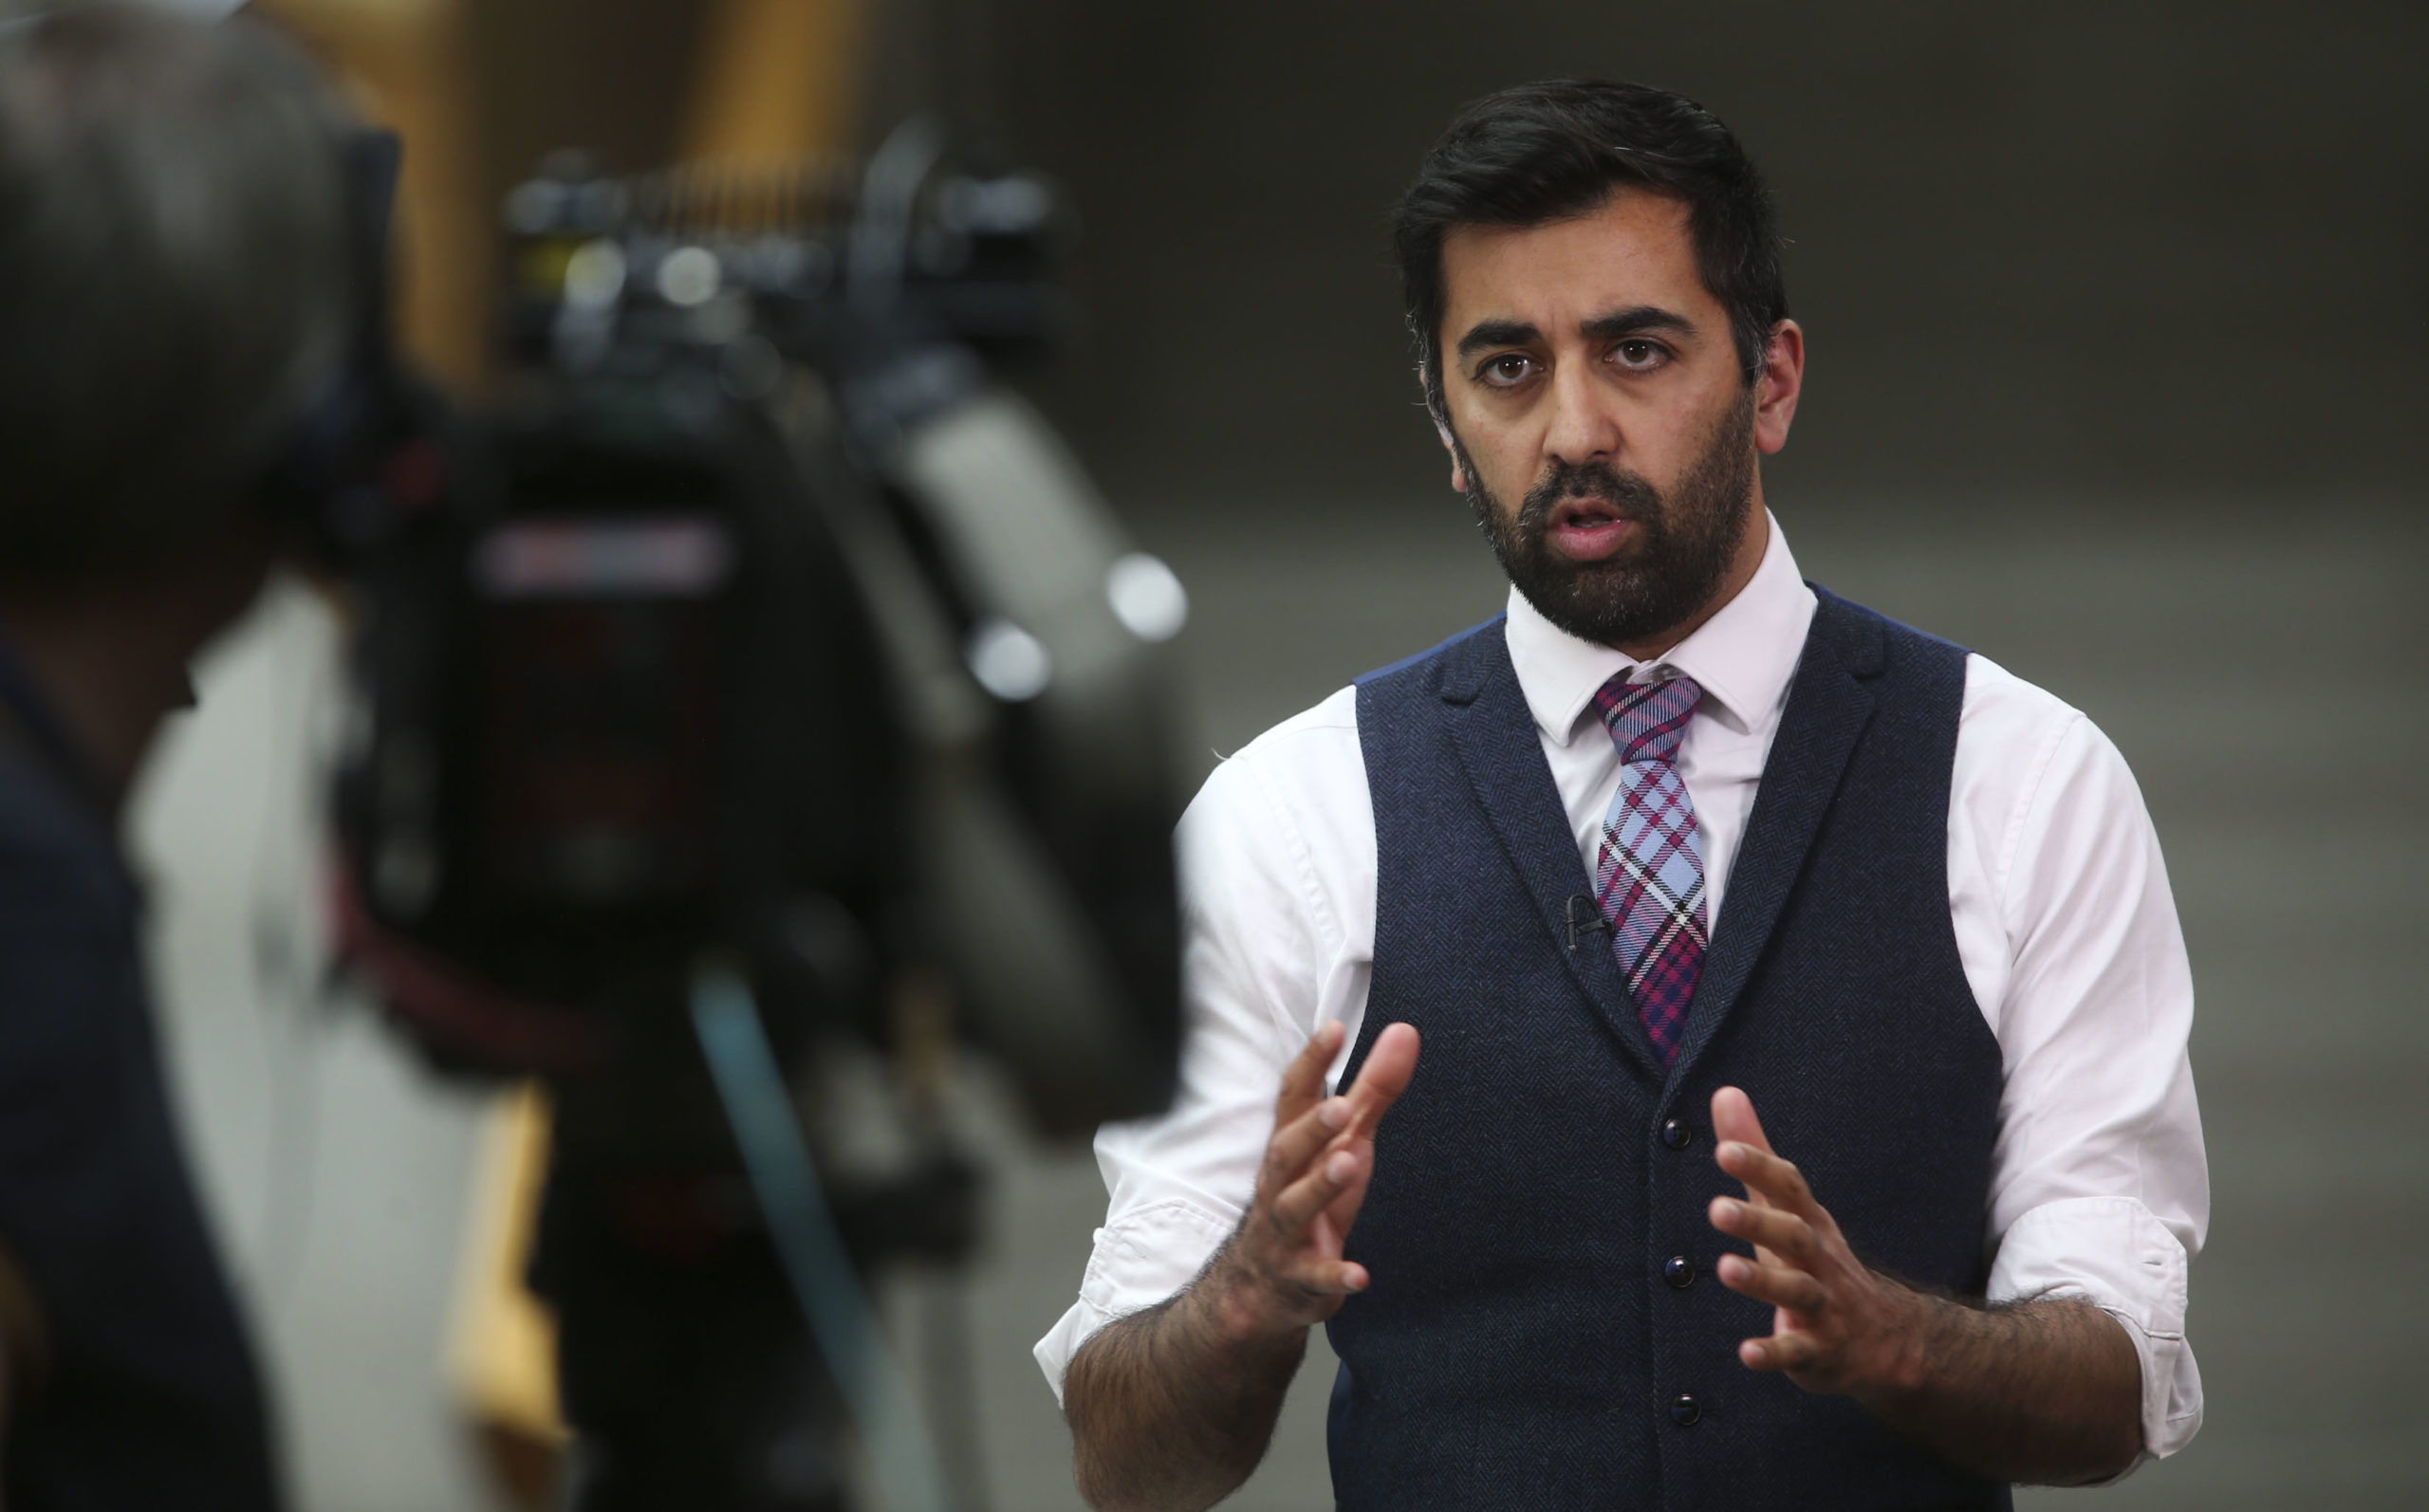 Scottish Justice Secretary Humza Yousaf offers Celtic challenge ahead of Glasgow Derby